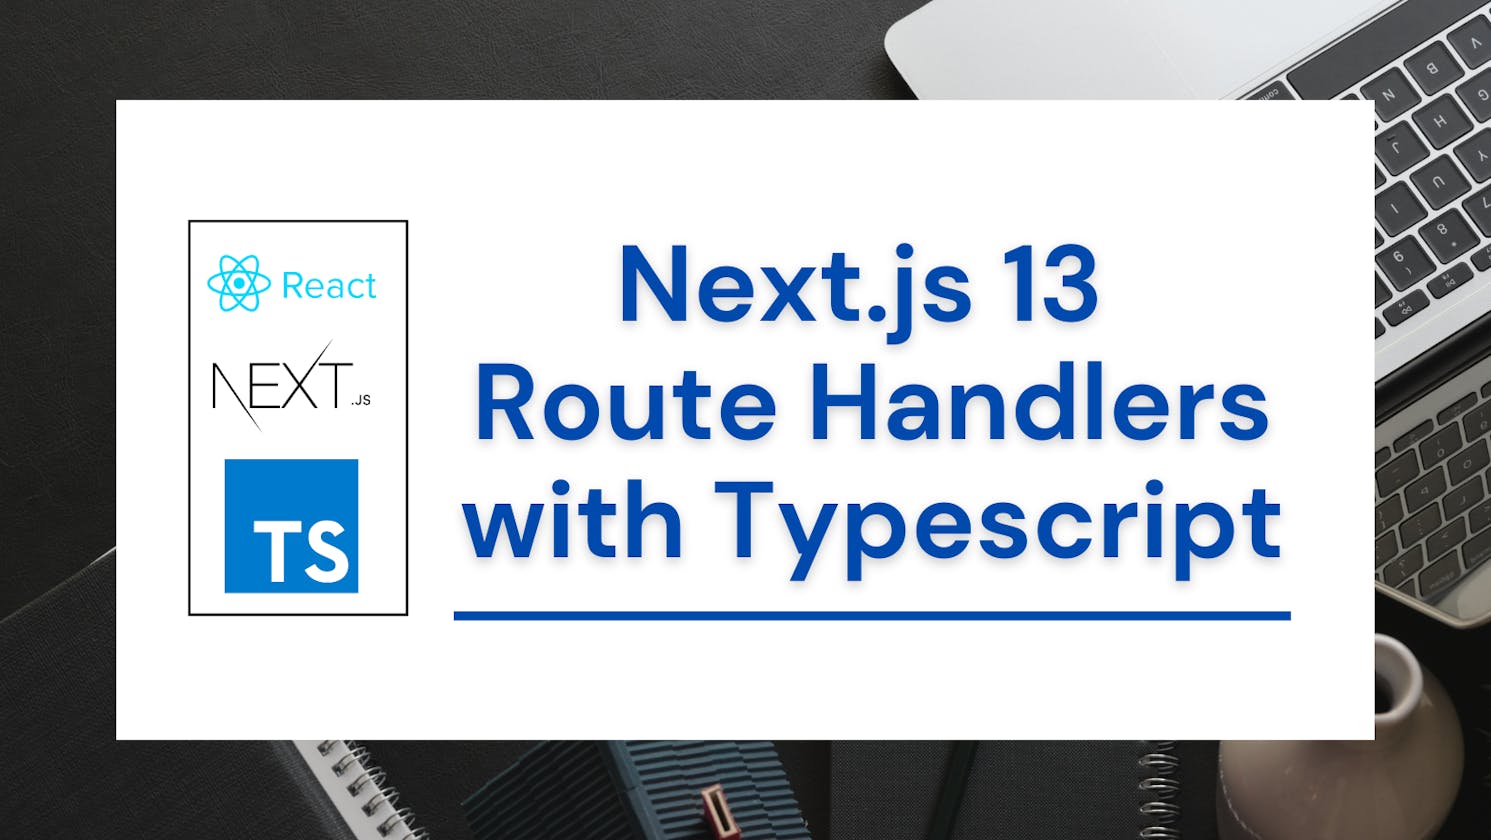 Next.js 13 Route Handlers with Typescript